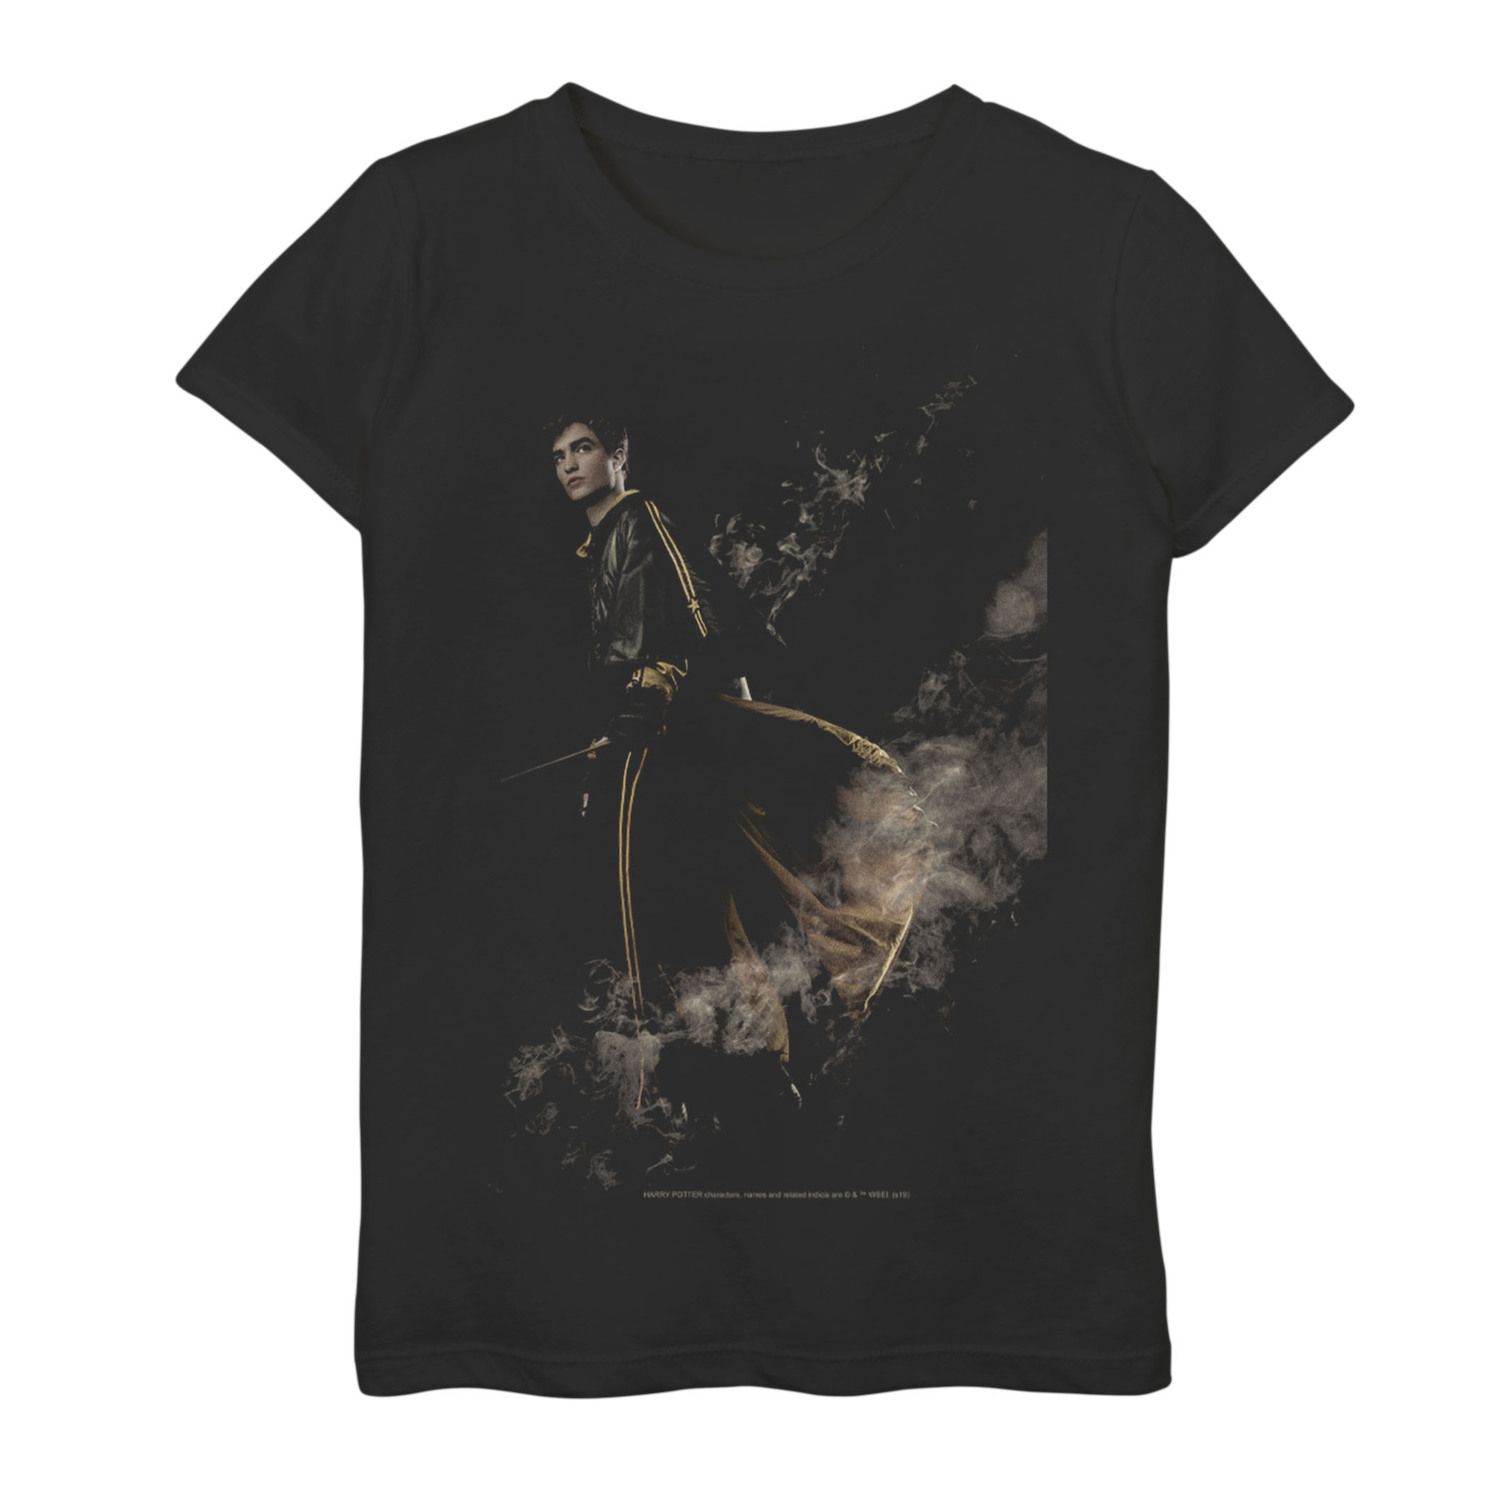 Image for Harry Potter Girls 7-16 Cedric Diggory Dark Portrait Graphic Tee at Kohl's.